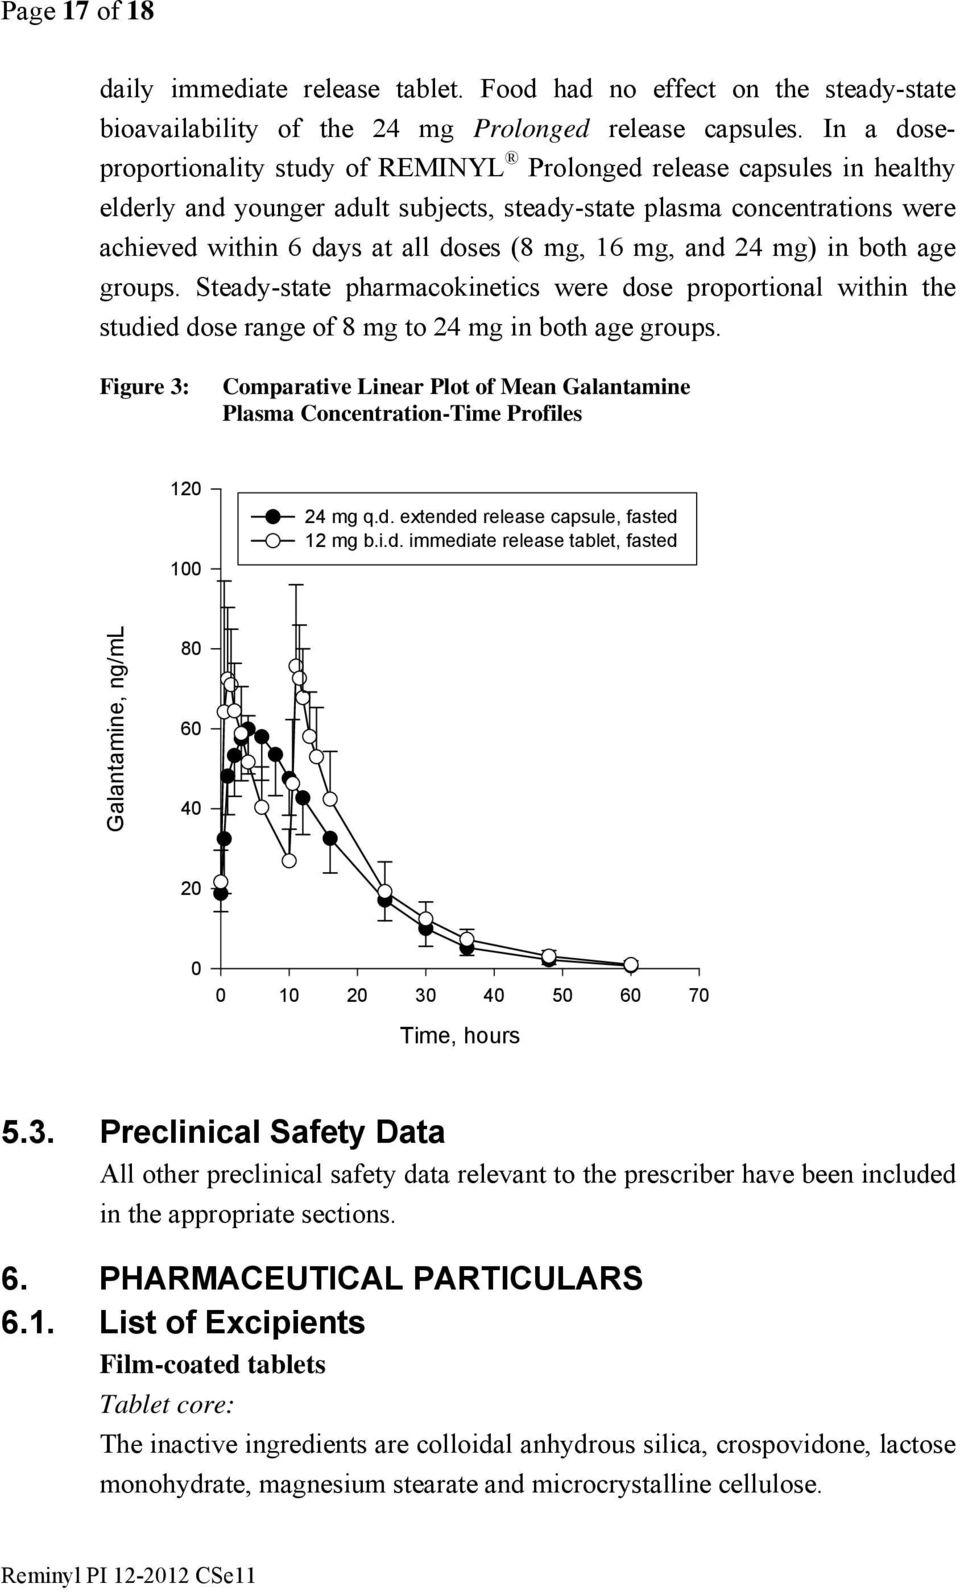 16 mg, and 24 mg) in both age groups. Steady-state pharmacokinetics were dose proportional within the studied dose range of 8 mg to 24 mg in both age groups.